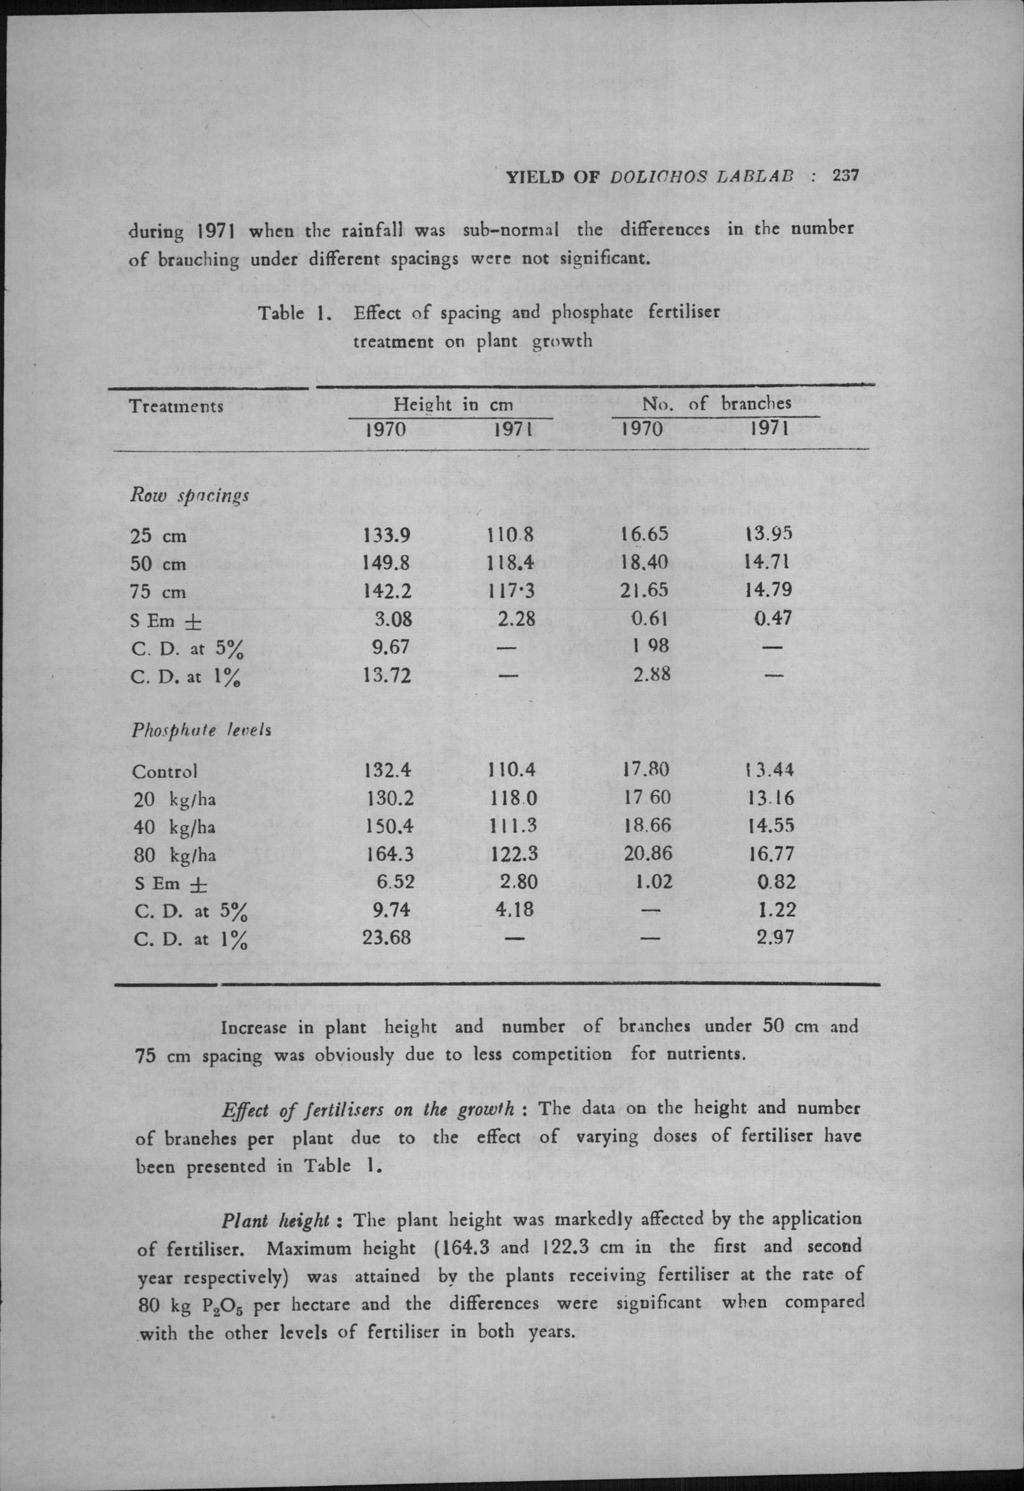 YIELD OF DOLlOHOS LABLAB ; 237 during 1971 when the rainfall was sub-normal the differences in the number of branching under different spacibgs were not significant. Table I.